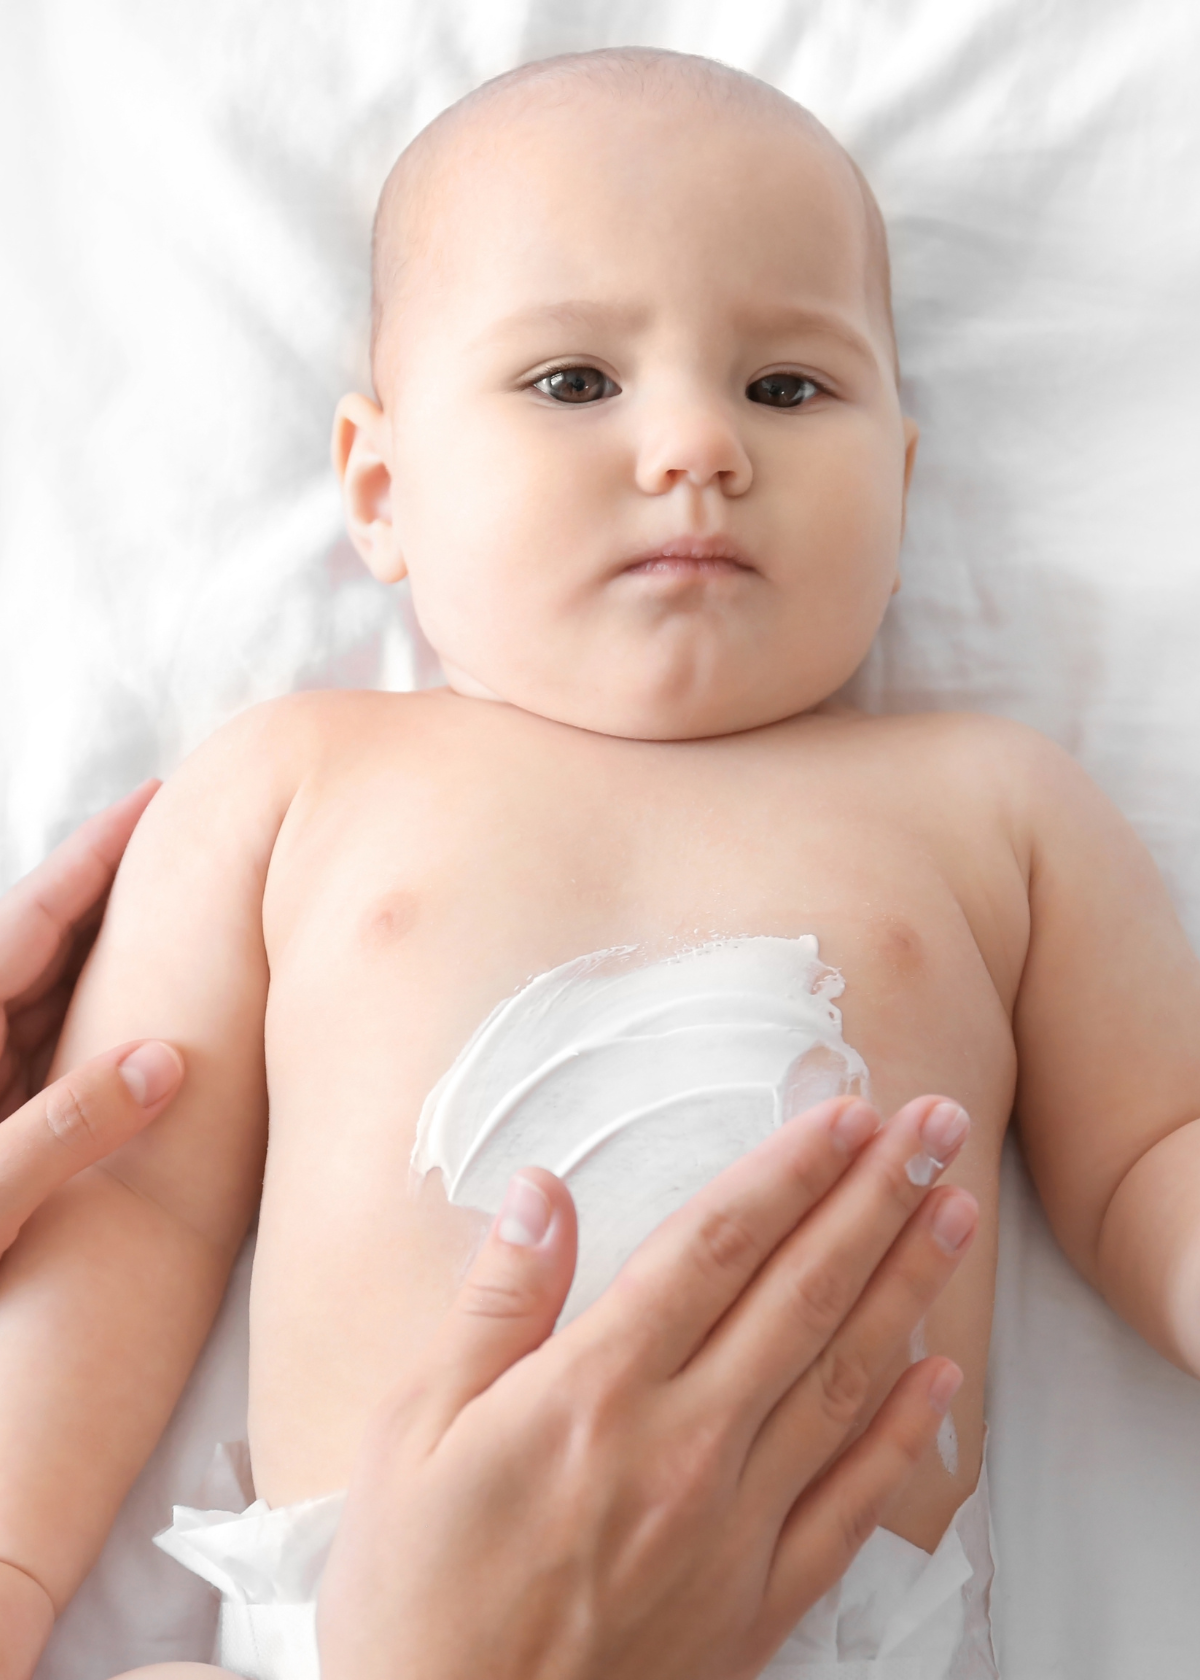 Is Calamine Lotion For Baby Safe?